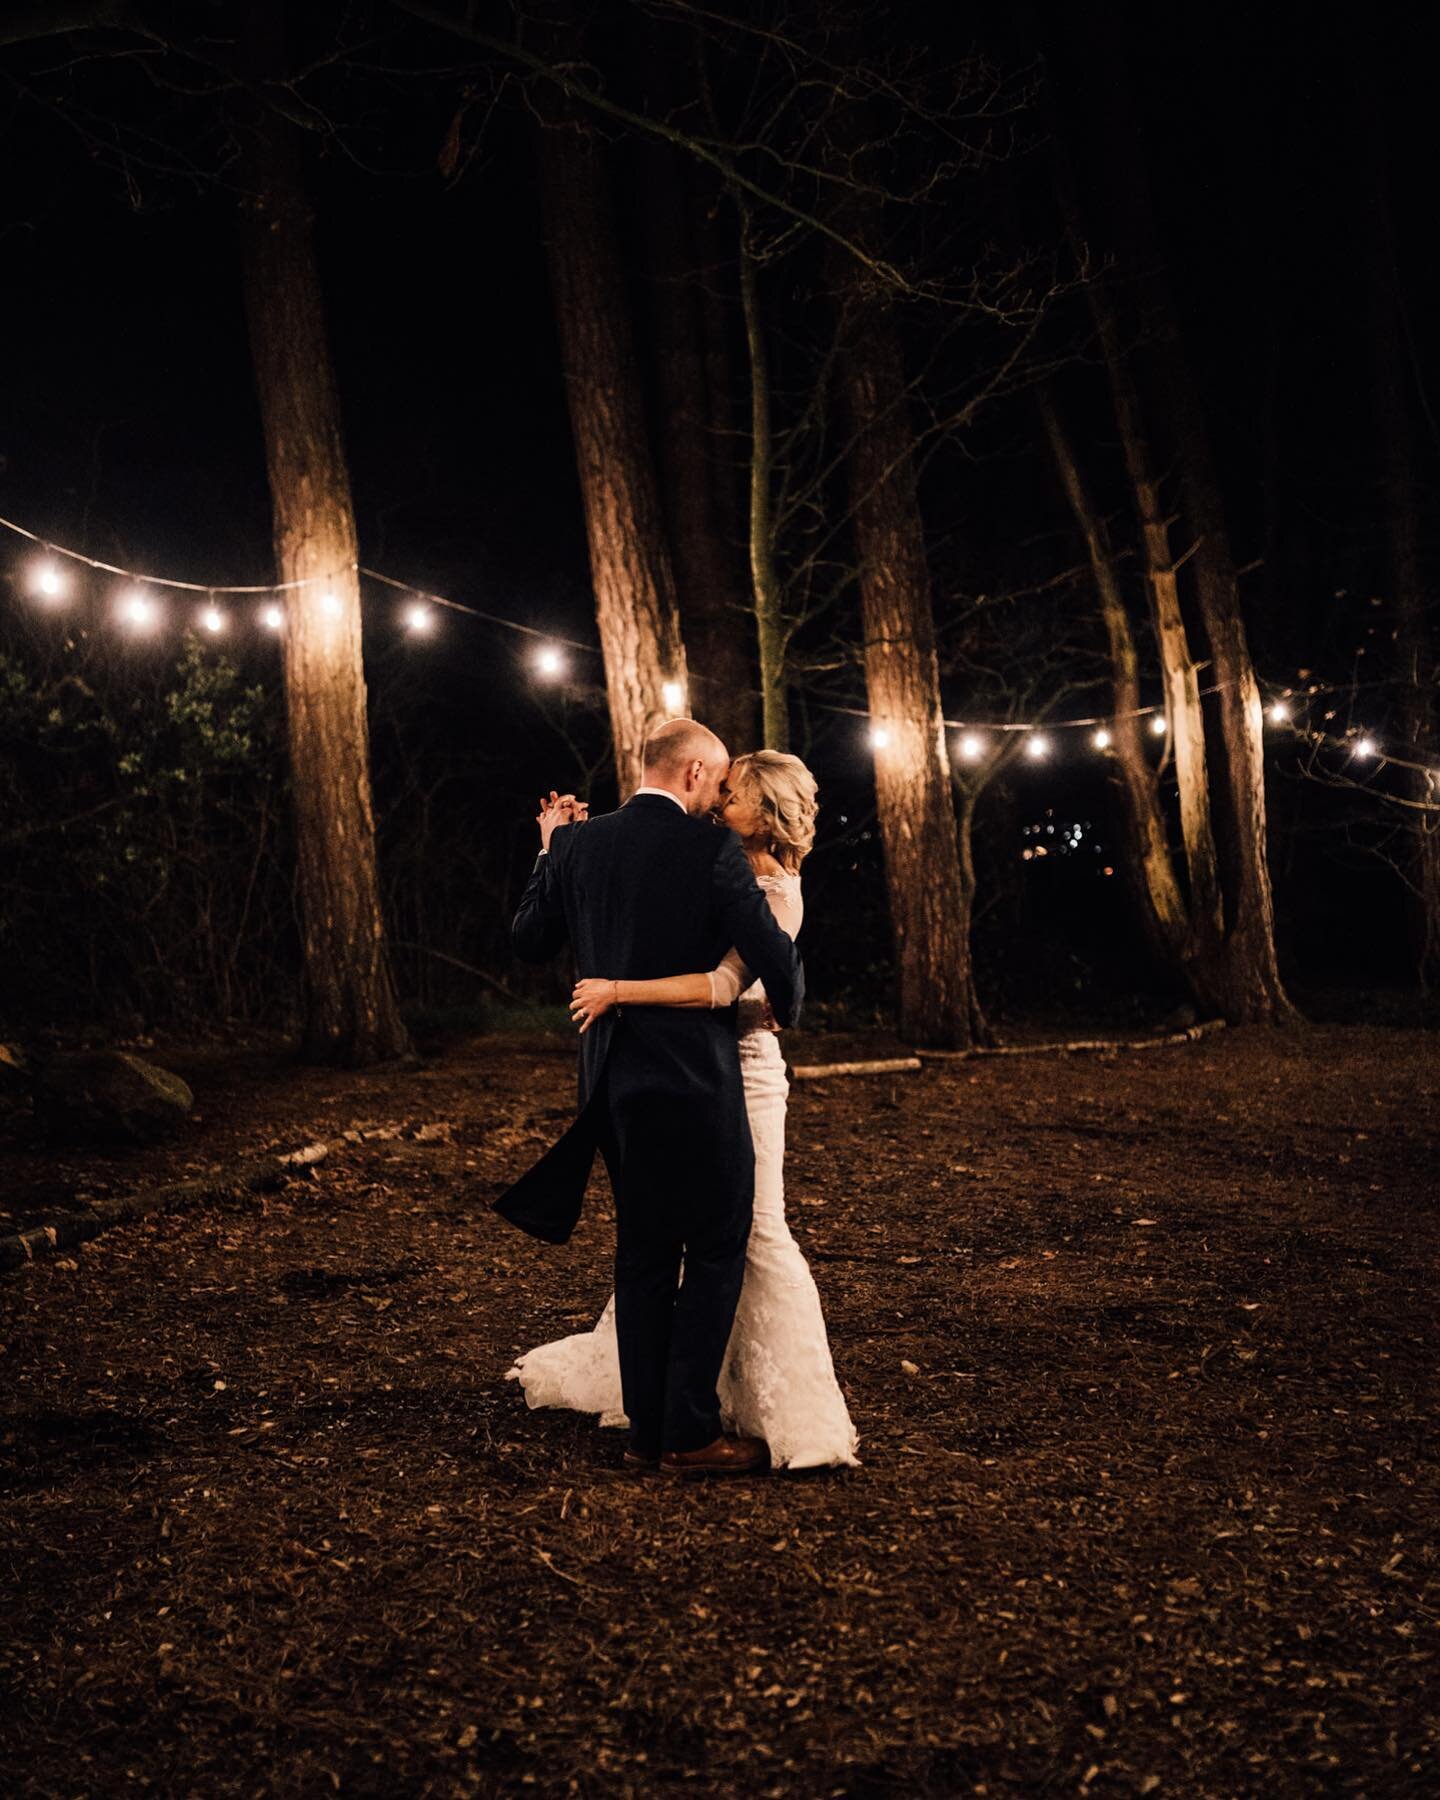 Hayley and Peter having a moment to themselves in the grounds of @hobbit.hill 

I even got a little sneak peek of their first dance! 

LOVE THIS JOB! 

#weddingphotographer #weddingphotography #lookslikefilm #realwedding #lookslikefilmweddings #lovei